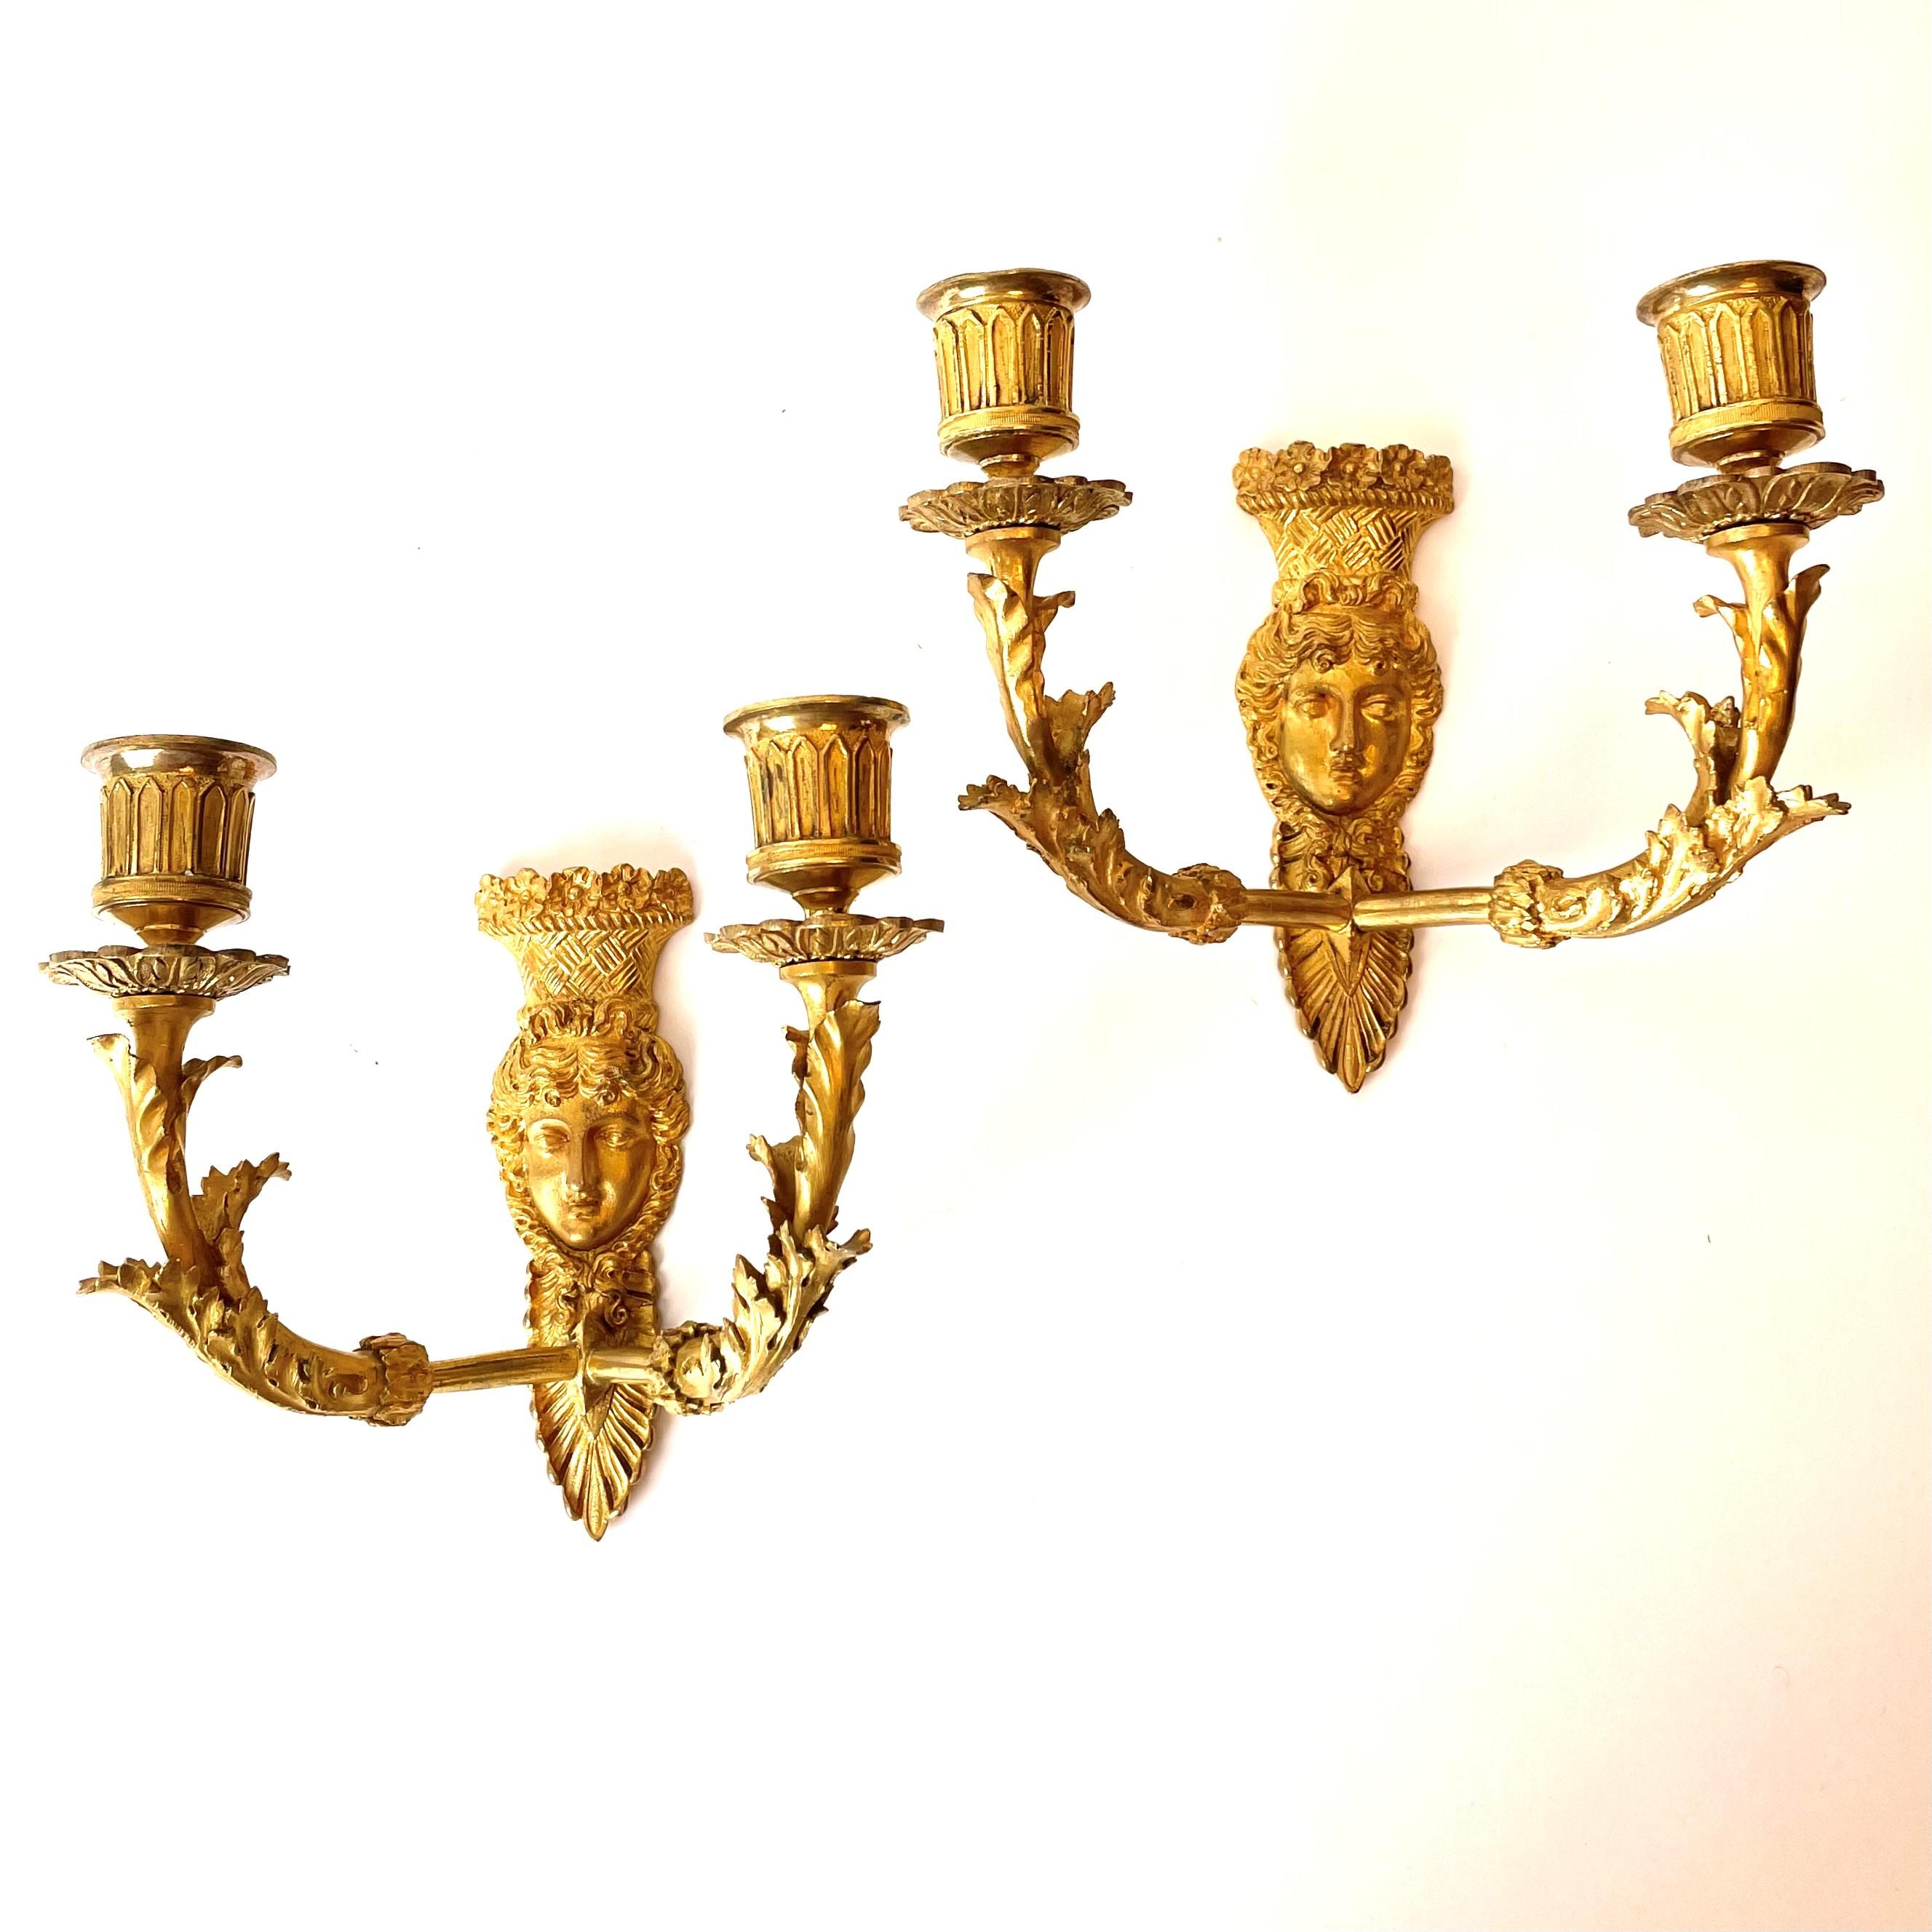 A beautiful and rare pair of gilt bronze Empire Appliques. Made in France during the 1820s. Some wear on the gilding exists, but also carries a beutiful patina. See pictures.

Wear consistent with age and use.